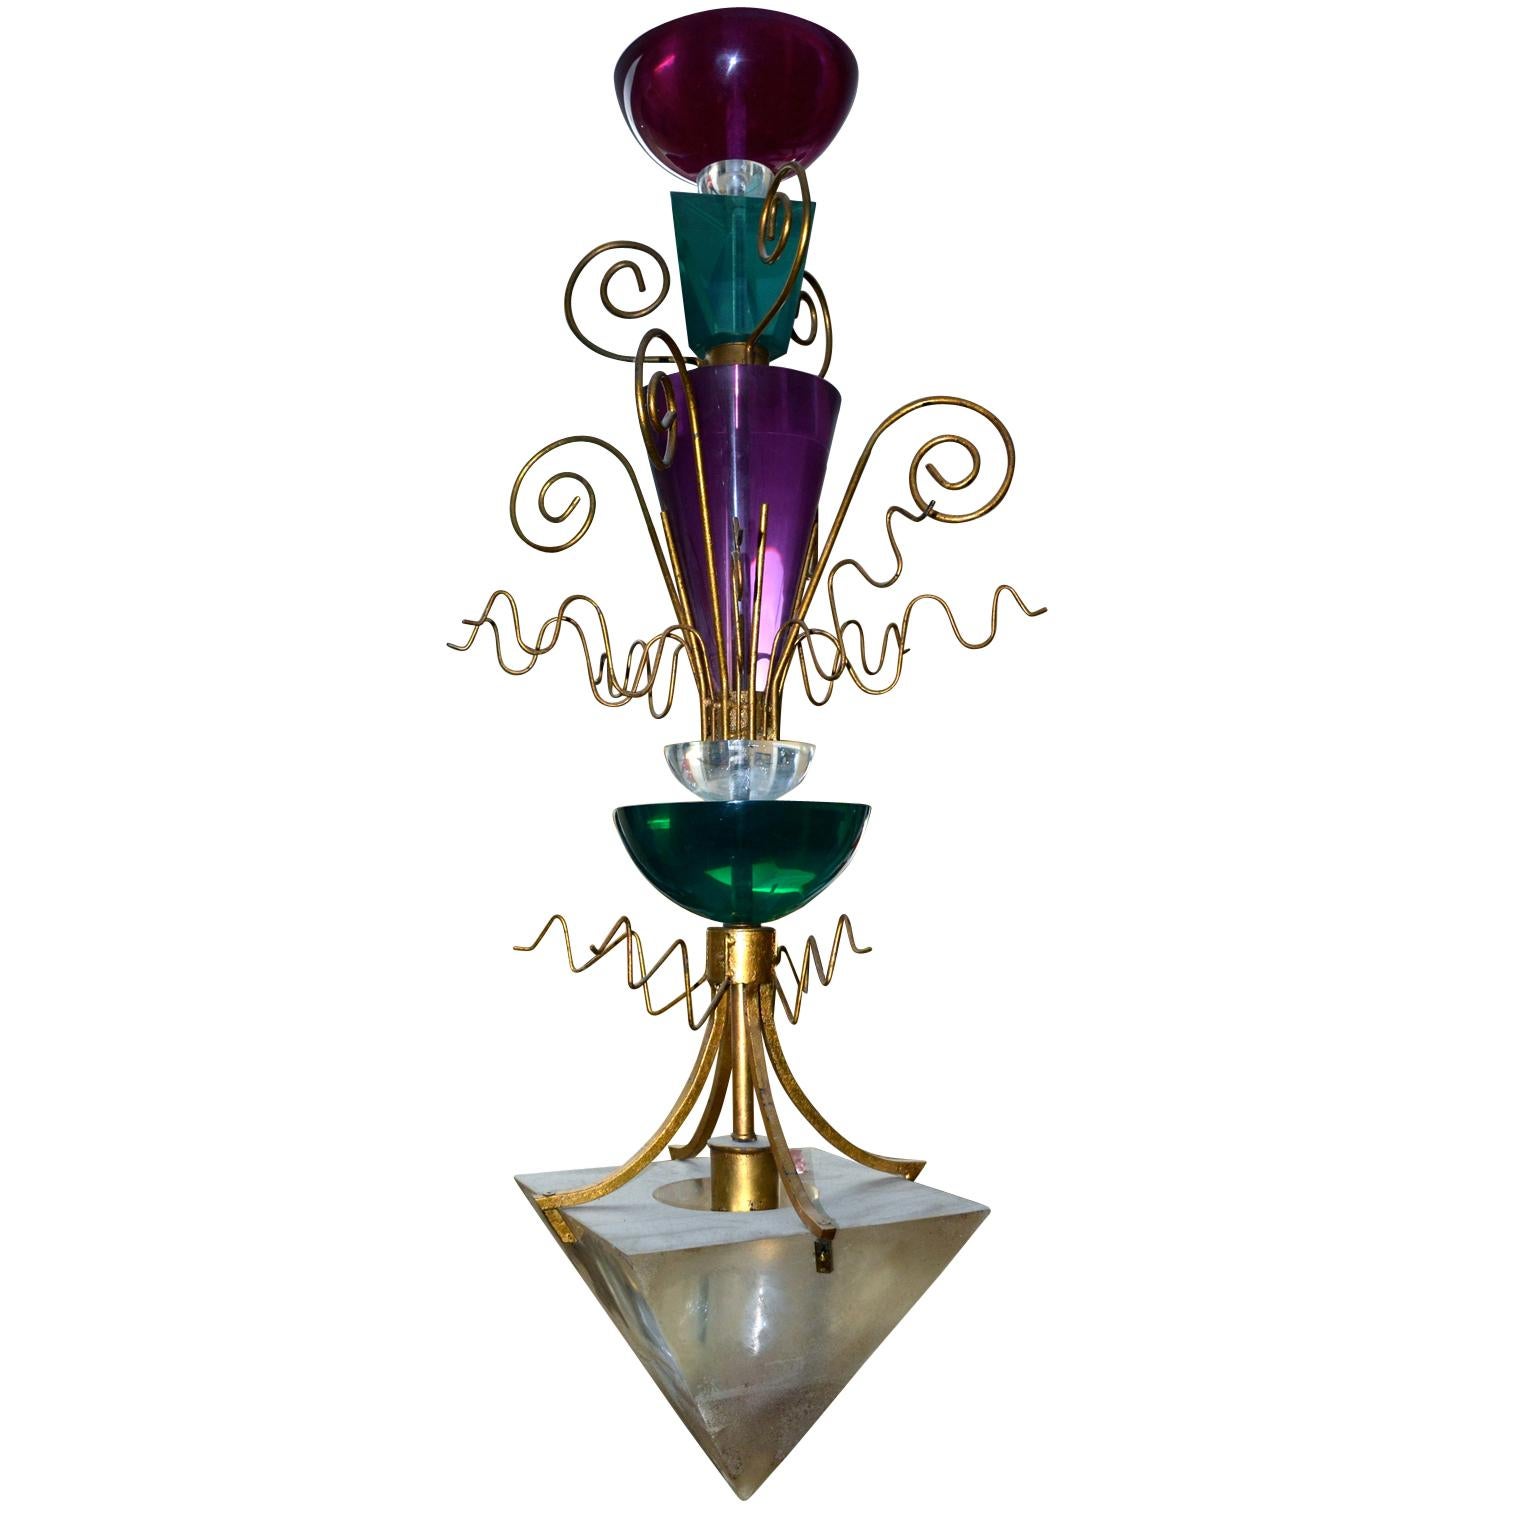 A Classic Van Teal 1960s chandelier having five large different colored and geometric shaped acrylic Lucite components stacked on top each other and terminating in a pyramid, each separated by a layer of twisted gilded metal decoration; the lowest